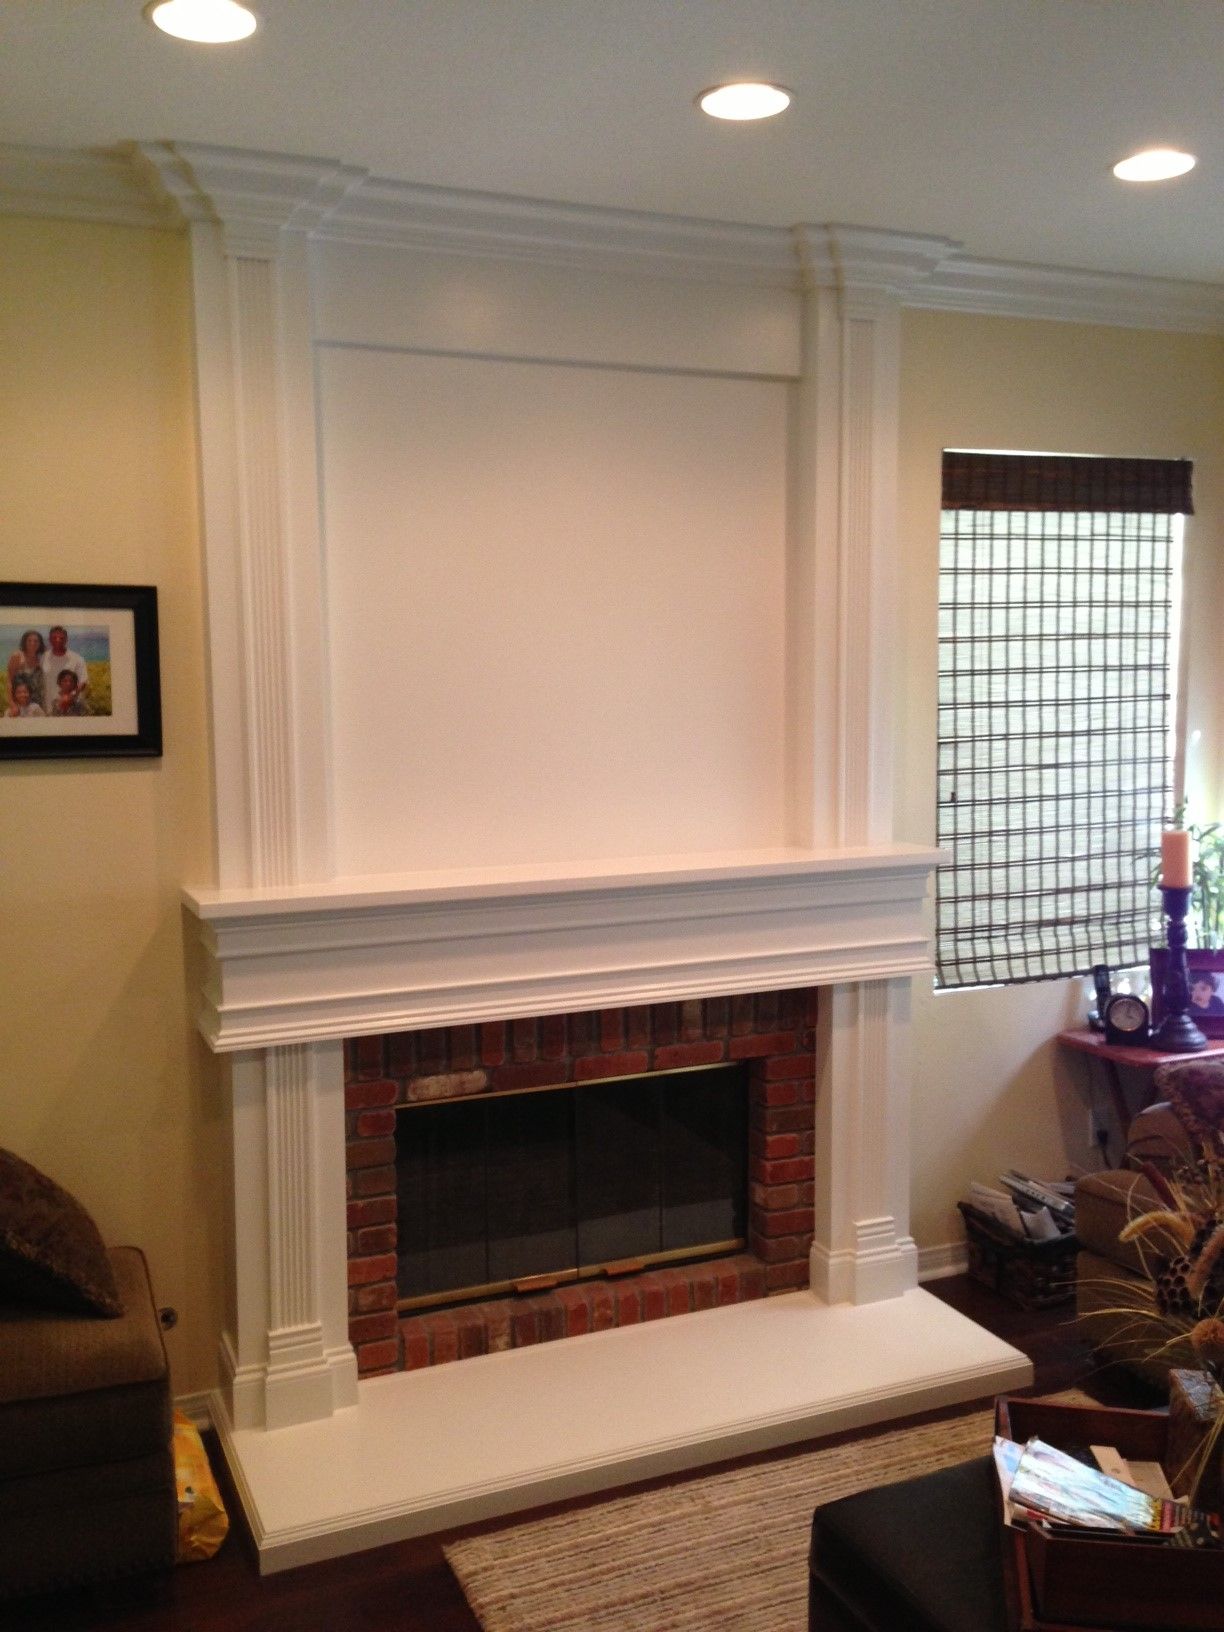 How to Build A Fireplace Mantel Shelf with Crown Molding Beautiful Custom Mantel Living Room